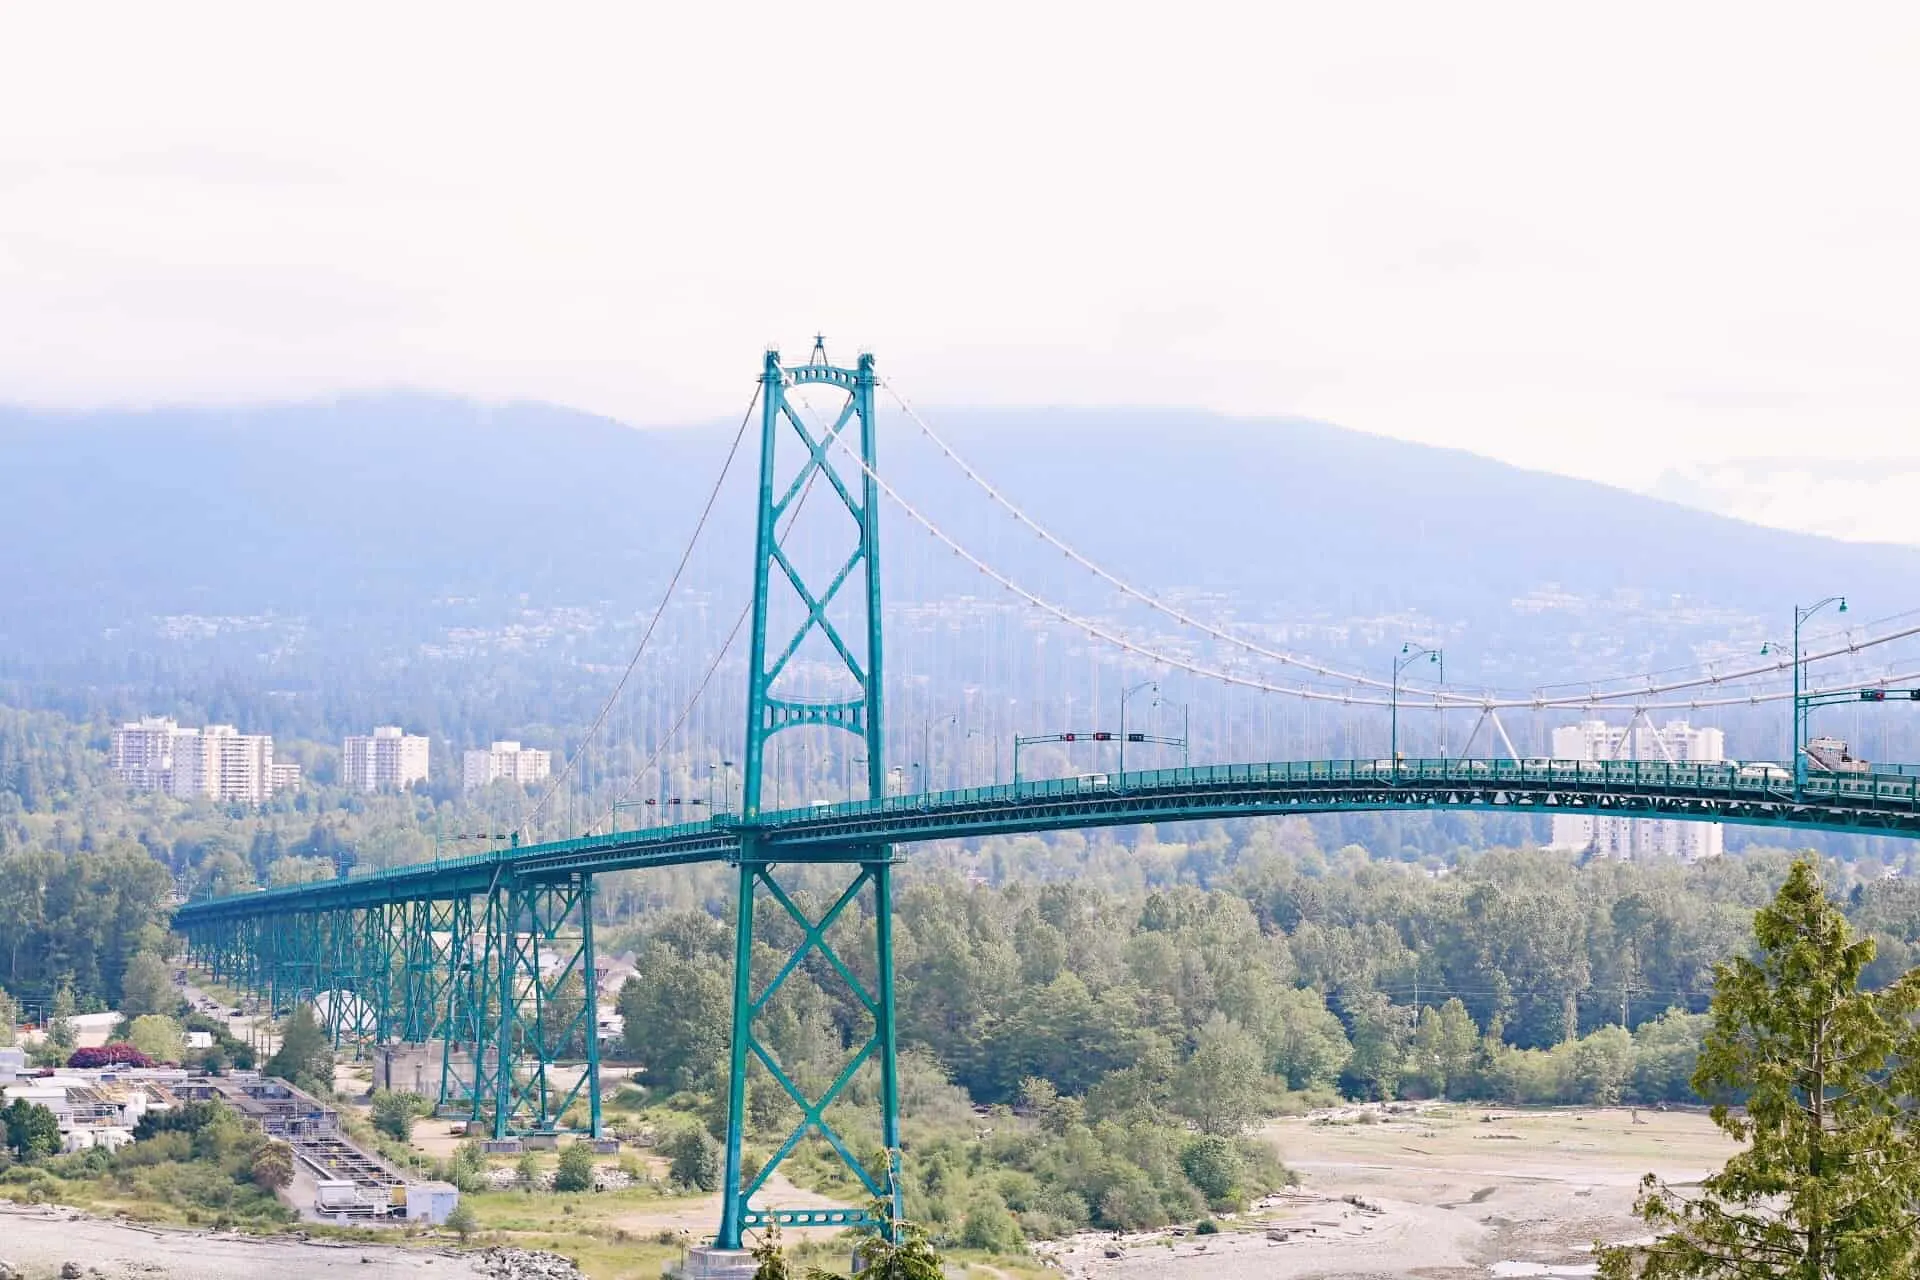 Lions Gate Bridge, Stanley Park Seawall | Vancouver, British Columbia | best things to do in Vancouver, BC